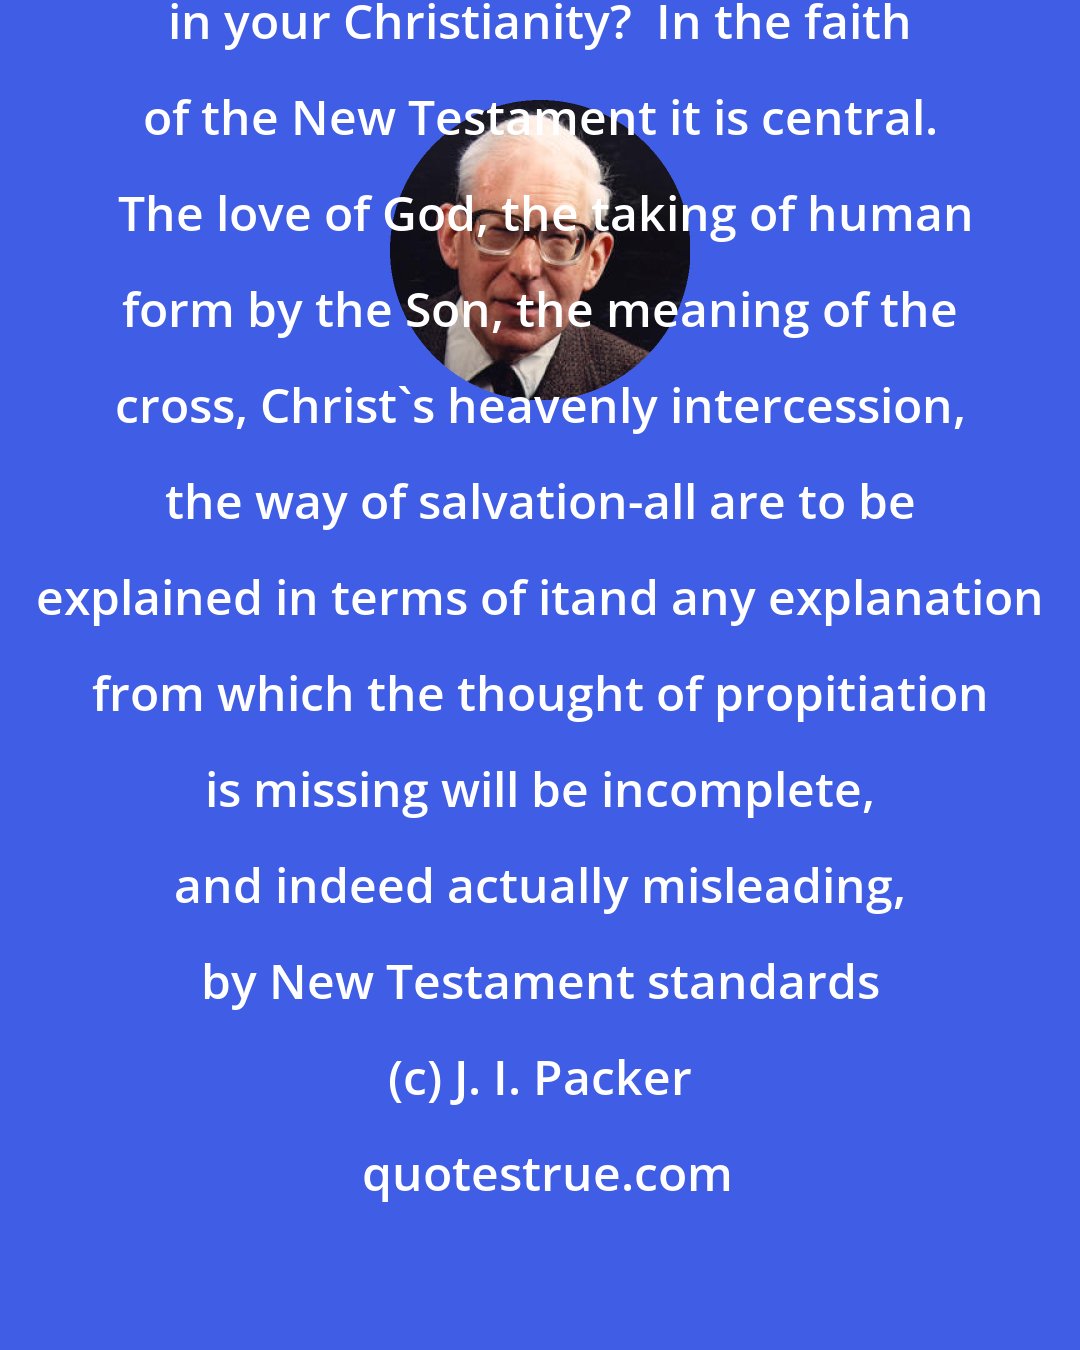 J. I. Packer: Has the word propitiation any place in your Christianity?  In the faith of the New Testament it is central.  The love of God, the taking of human form by the Son, the meaning of the cross, Christ's heavenly intercession, the way of salvation-all are to be explained in terms of itand any explanation from which the thought of propitiation is missing will be incomplete, and indeed actually misleading, by New Testament standards